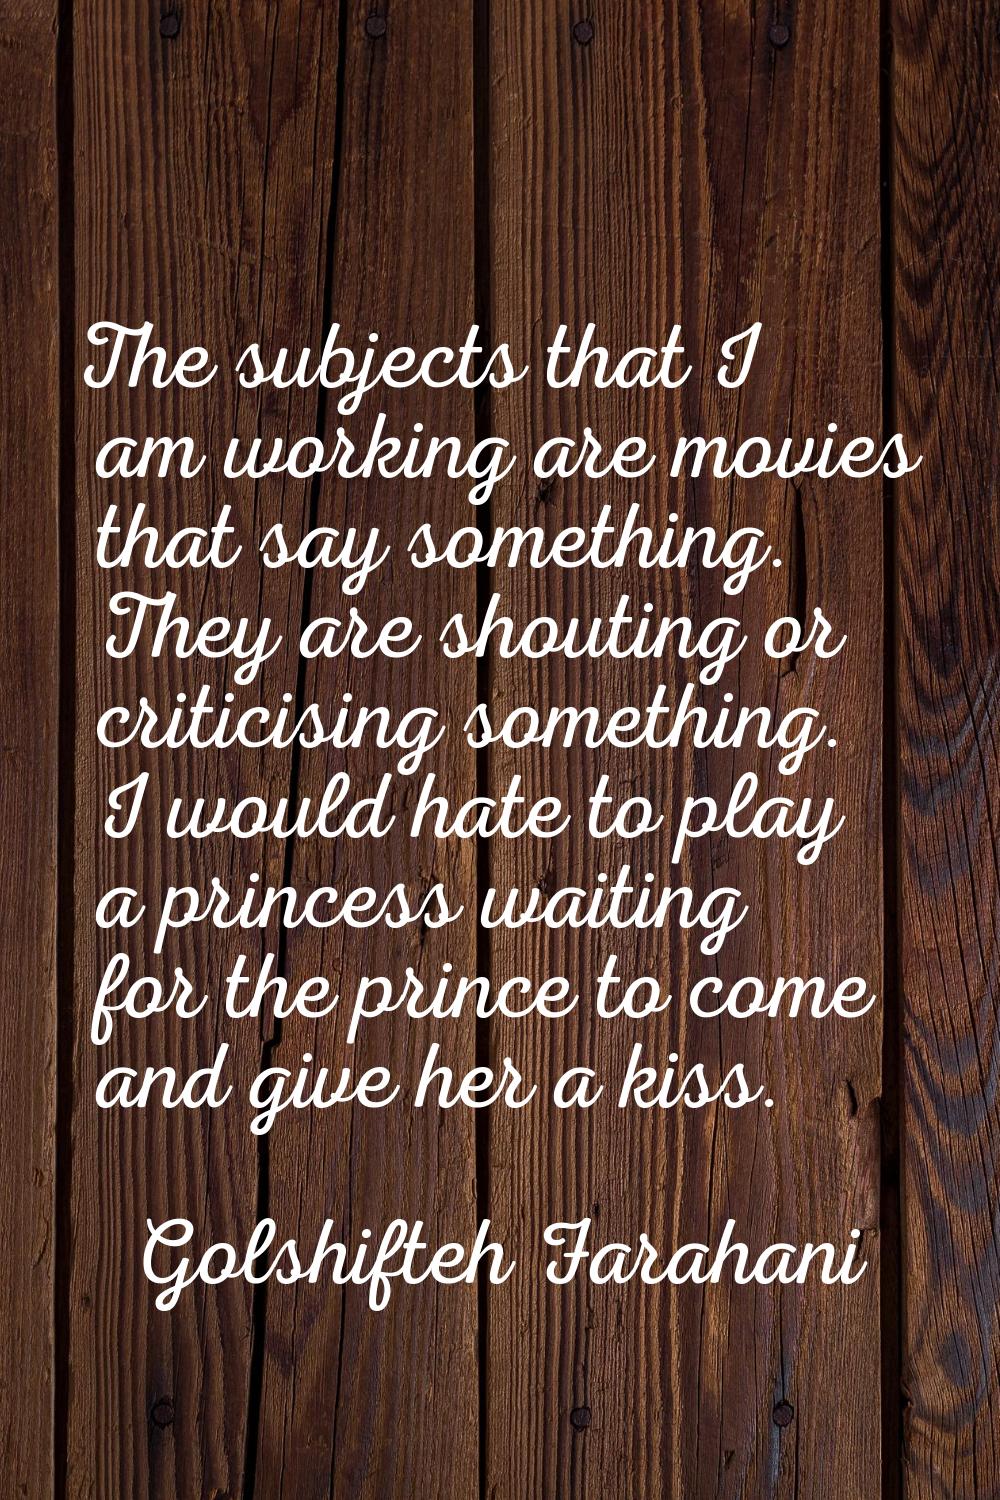 The subjects that I am working are movies that say something. They are shouting or criticising some